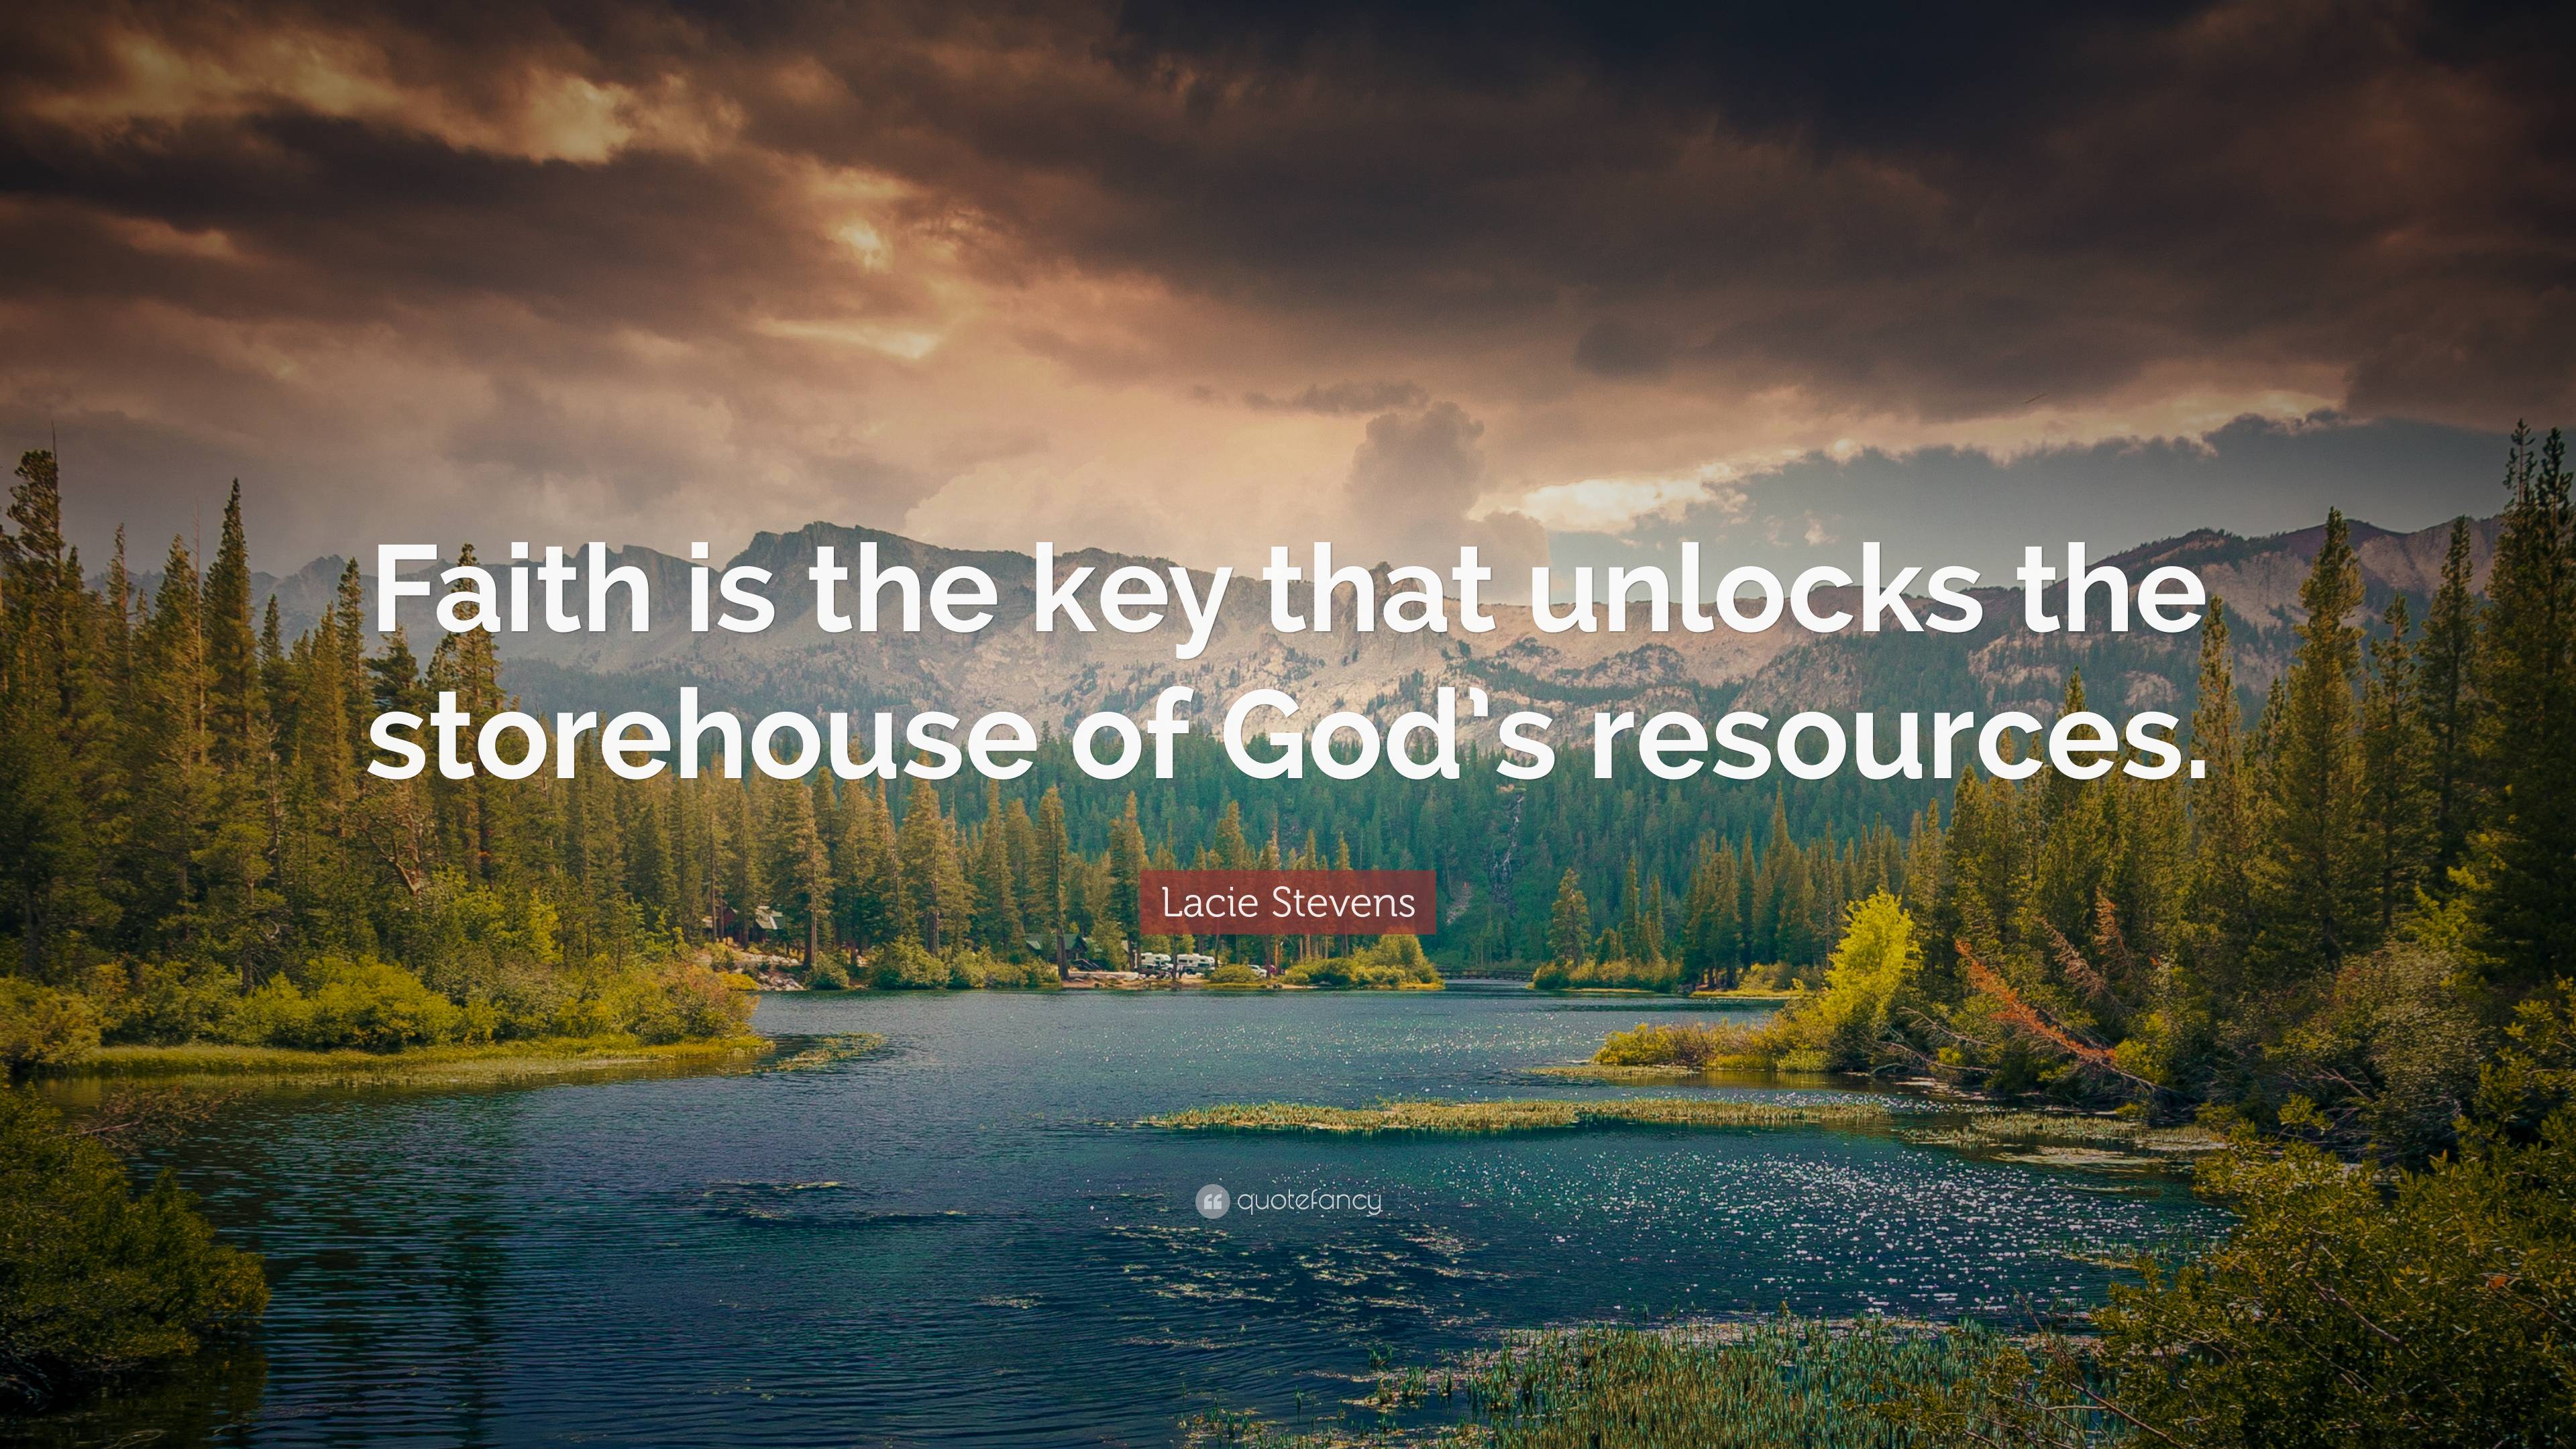 Lacie Stevens Quote “faith Is The Key That Unlocks The Storehouse Of